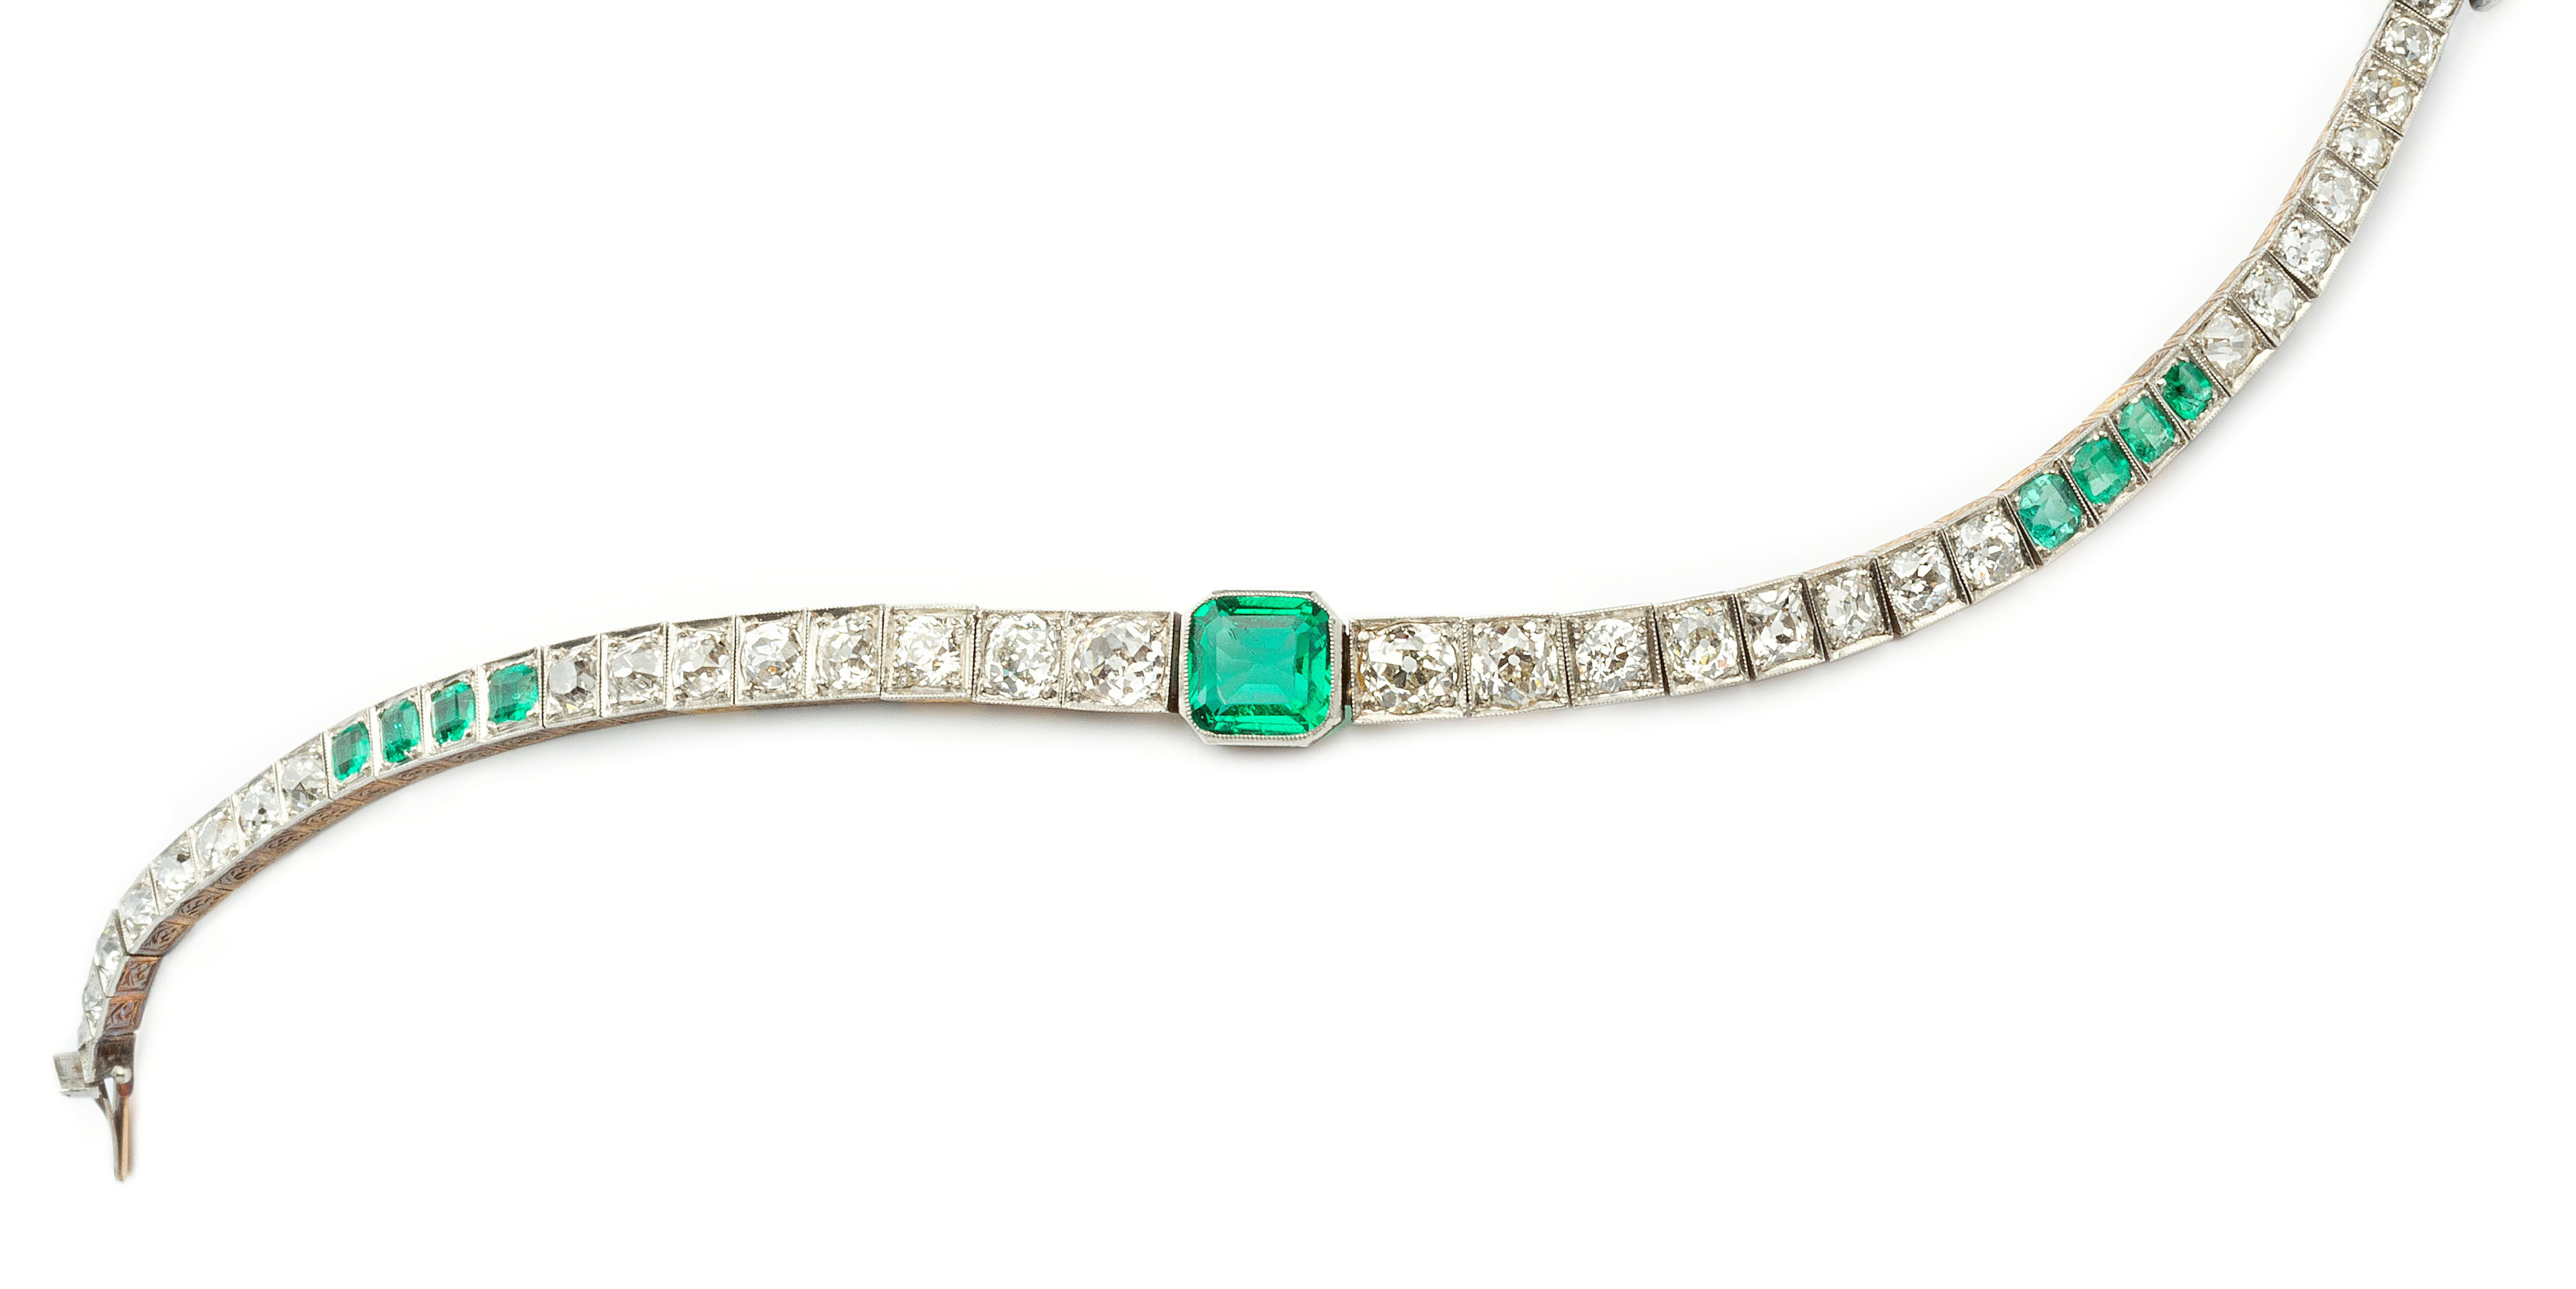 Art Deco Bracelet Hits the Top Spot at Mallams’ Jewellery, Watches and Silver Sale